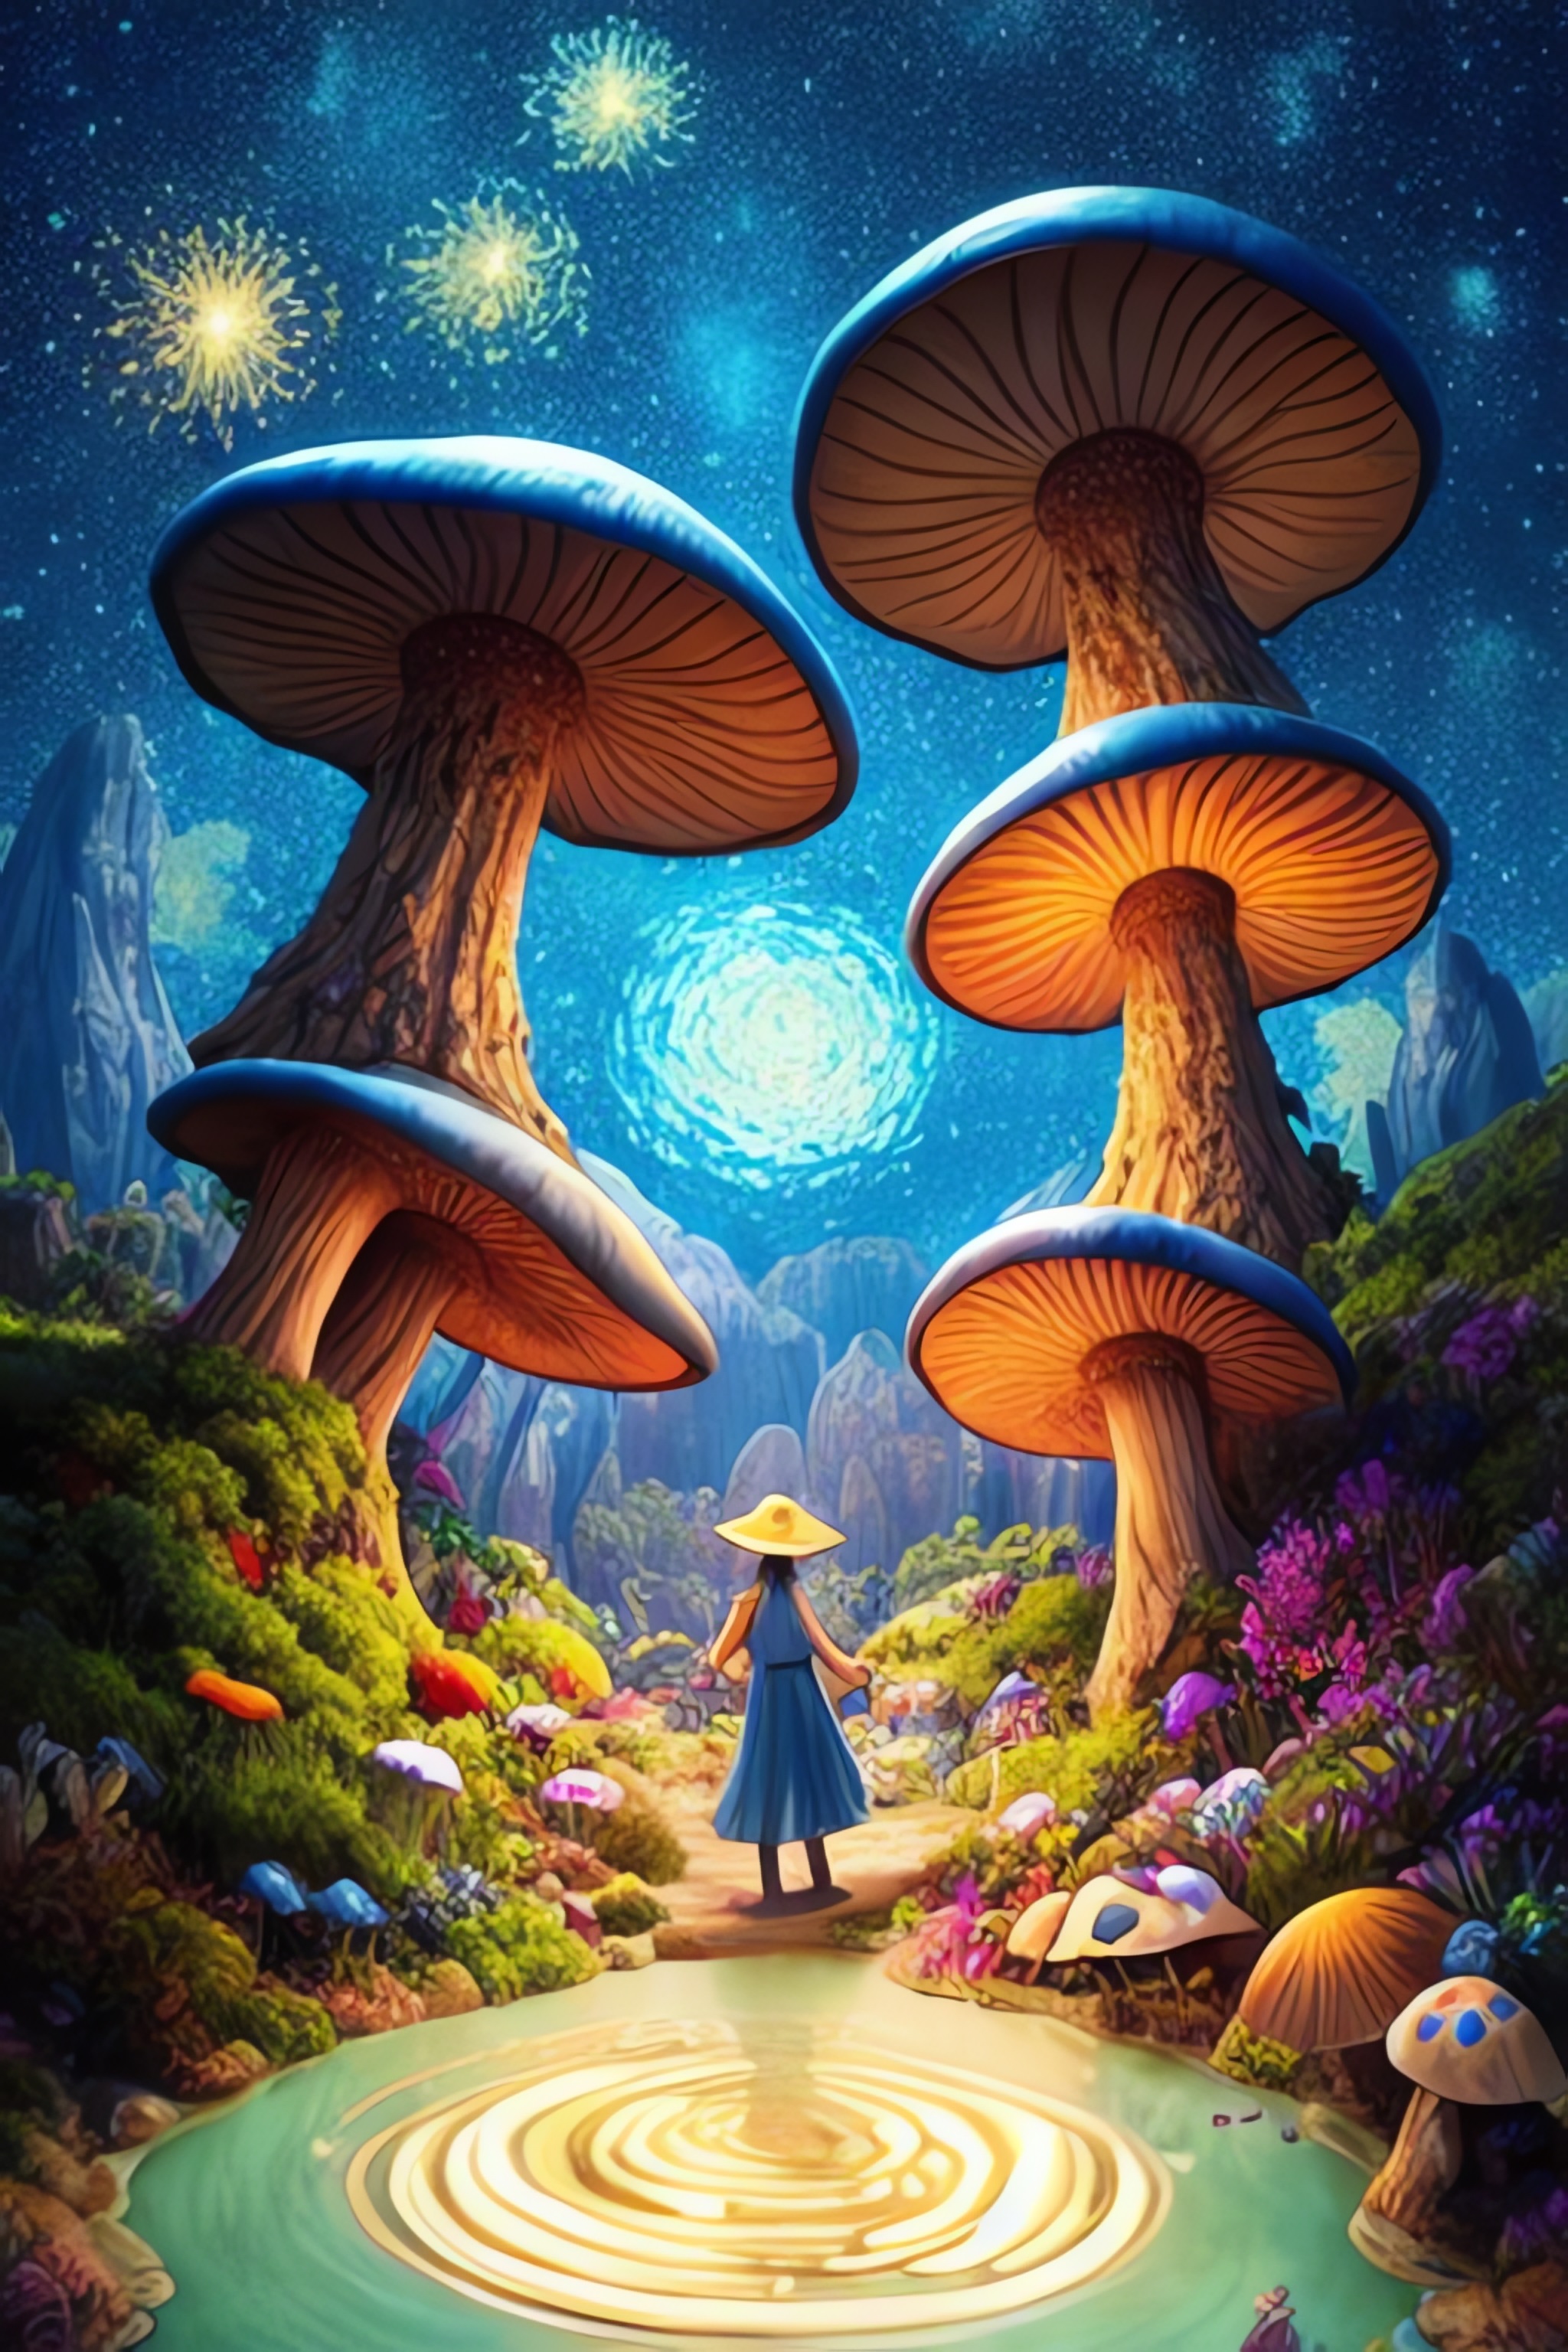 17 images of The Mushroom World in Fairy Tales by Stable Diffusion